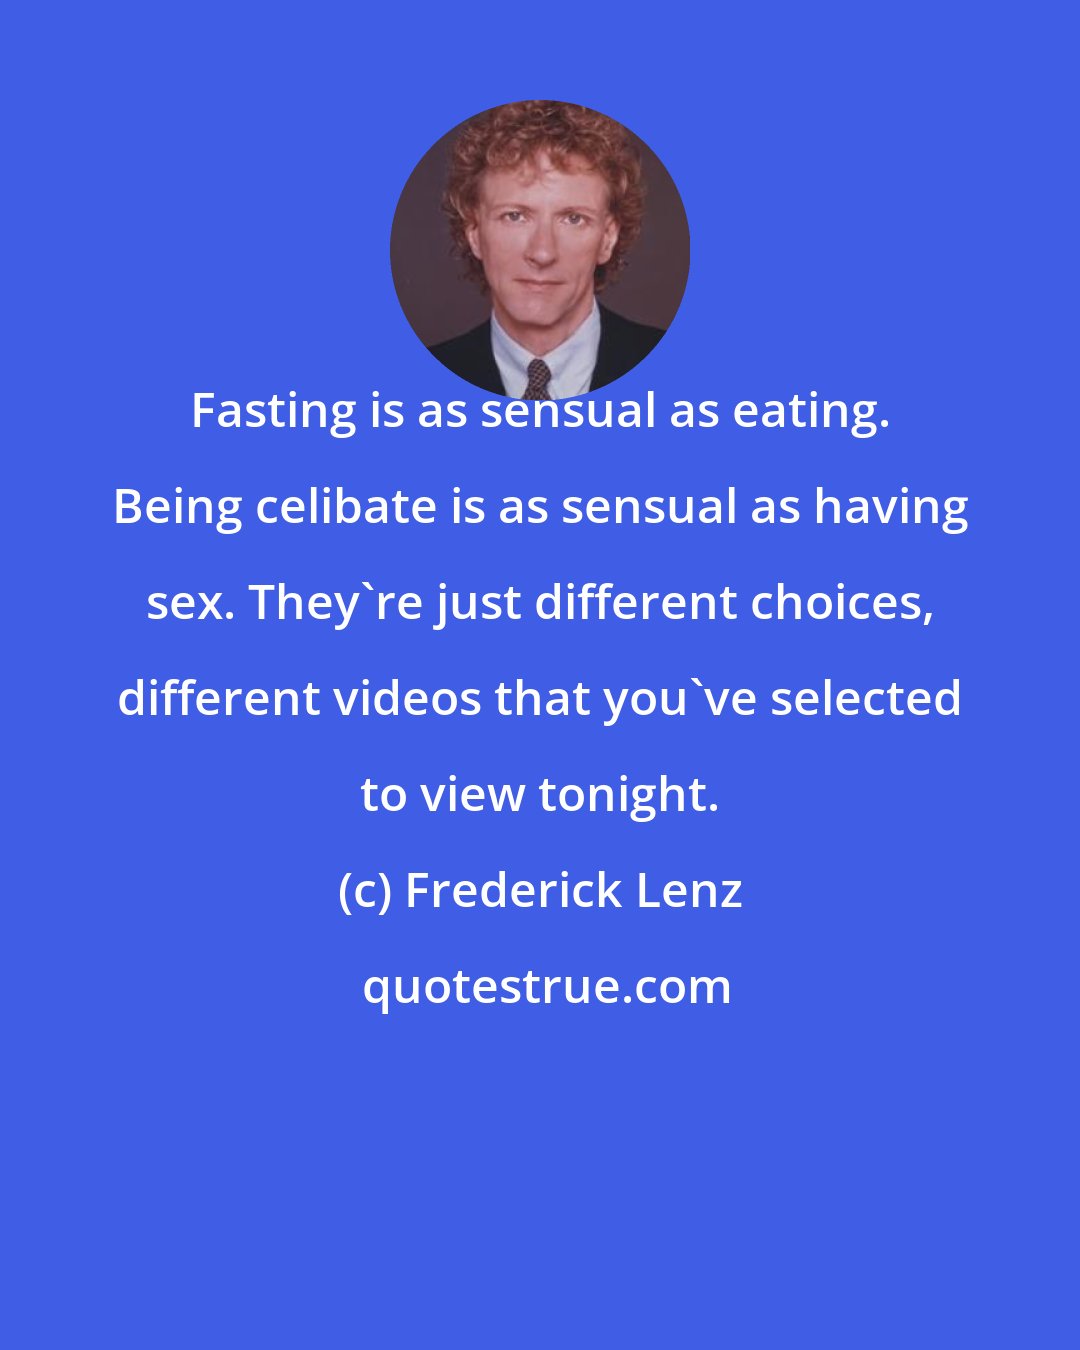 Frederick Lenz: Fasting is as sensual as eating. Being celibate is as sensual as having sex. They're just different choices, different videos that you've selected to view tonight.